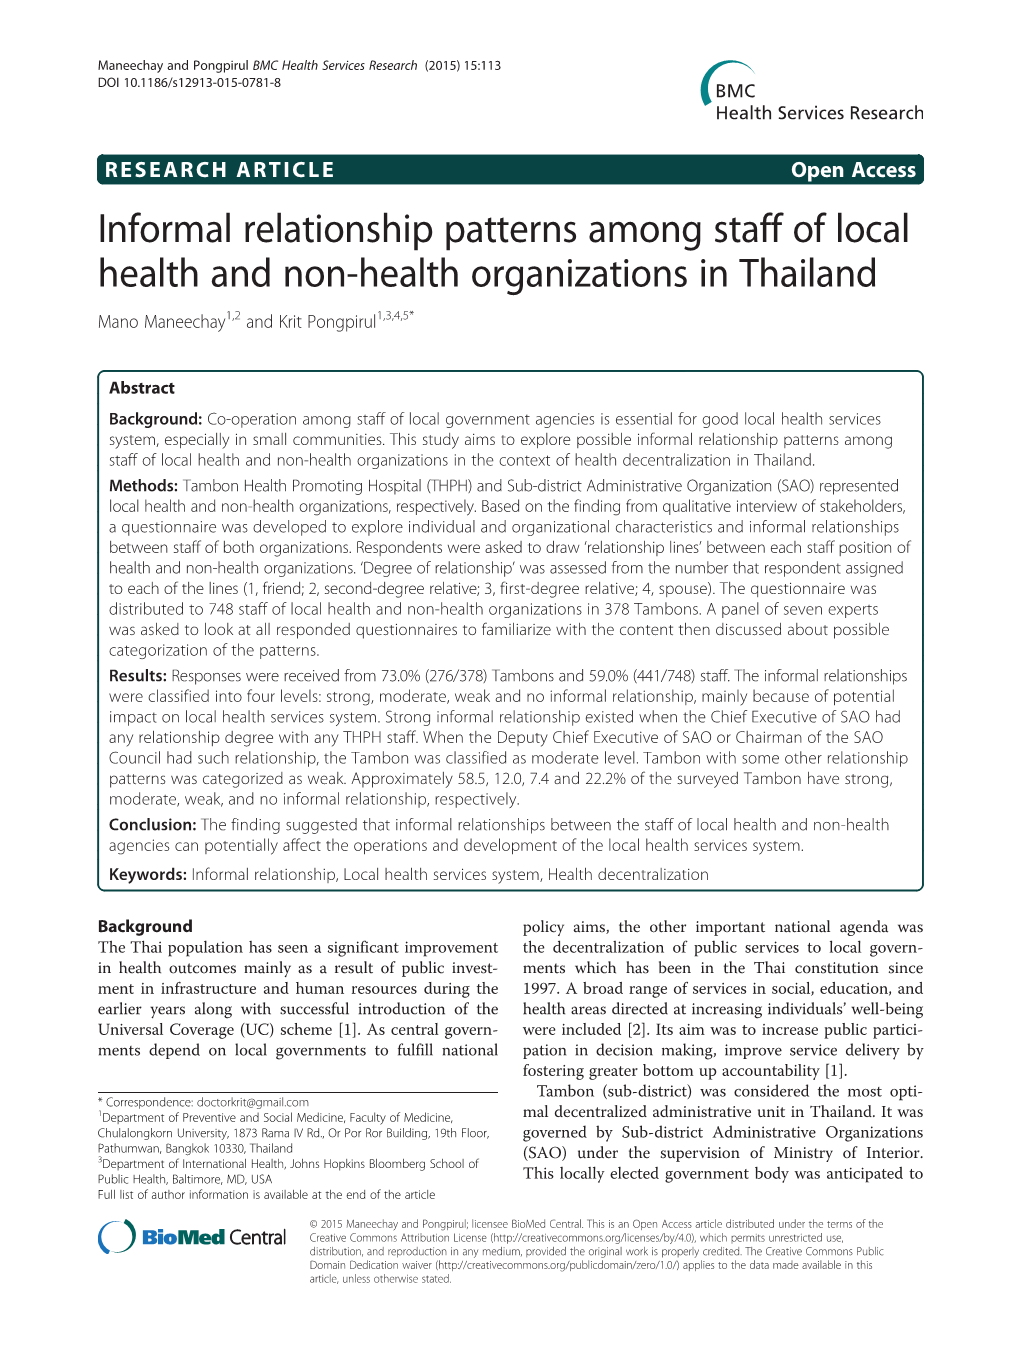 Informal Relationship Patterns Among Staff of Local Health and Non-Health Organizations in Thailand Mano Maneechay1,2 and Krit Pongpirul1,3,4,5*